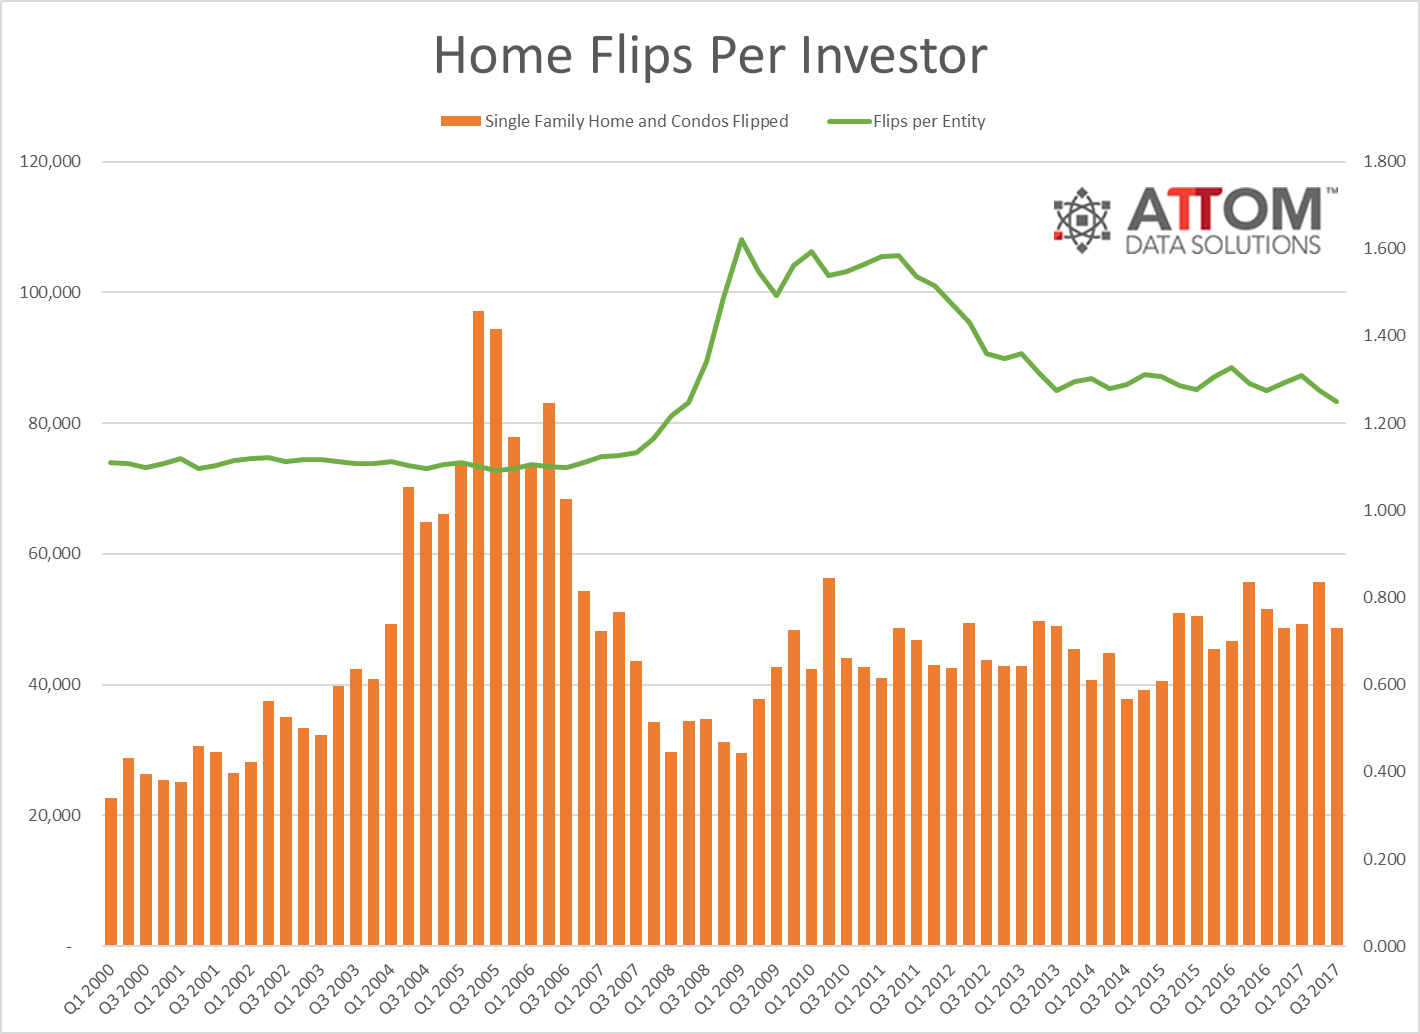 Home flippers are not seeing the big bucks they had hoped for, according to ATTOM Data Solutions’ latest Home Flipping Report